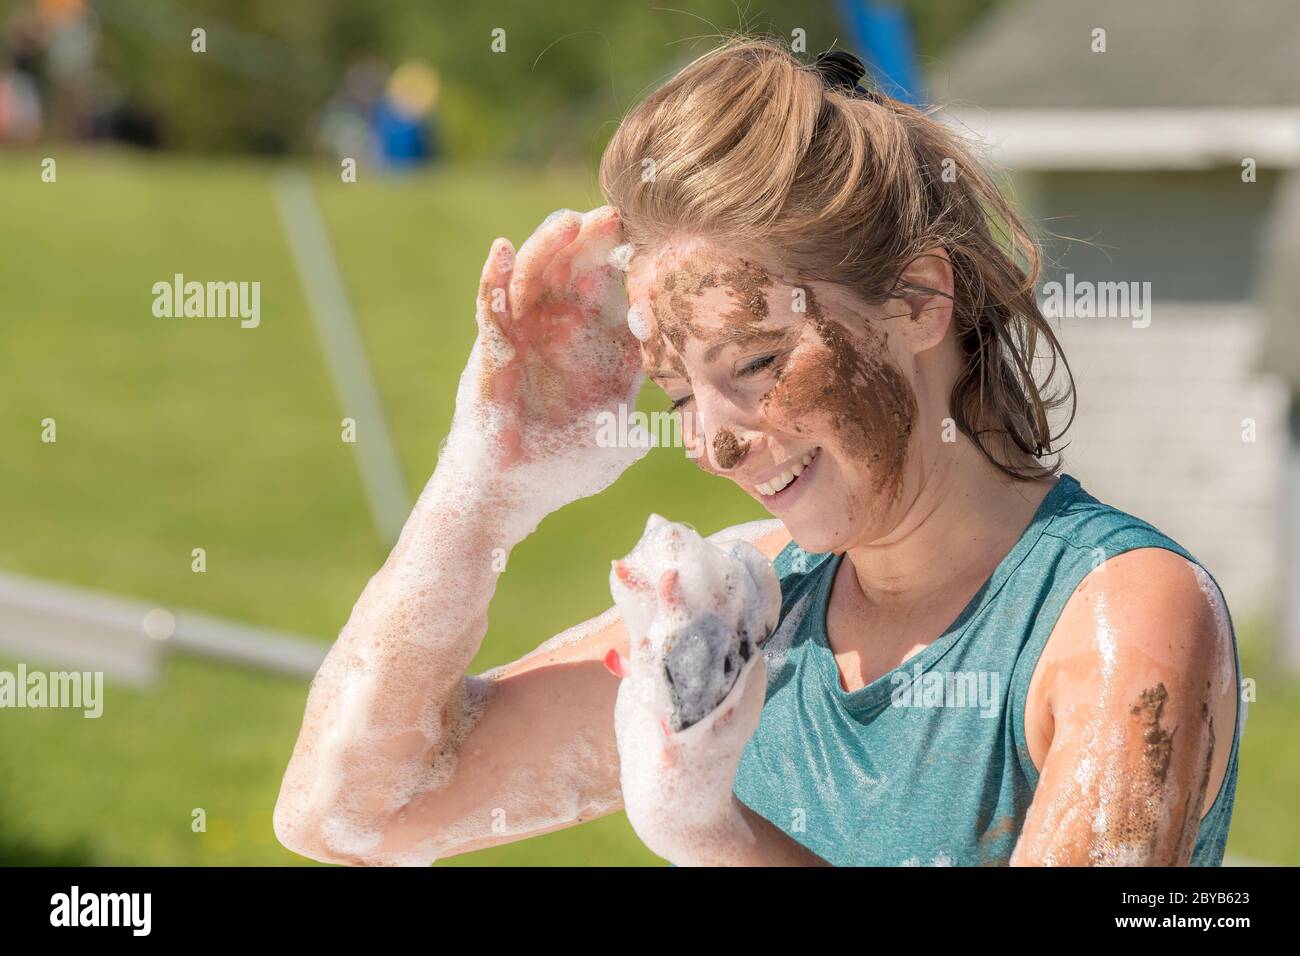 Poley Mountain, New Brunswick, Canada - June 10, 2017: Participating in the annual fundraiser 'Mud Run For Heart'. A woman covered with mud and soap s Stock Photo